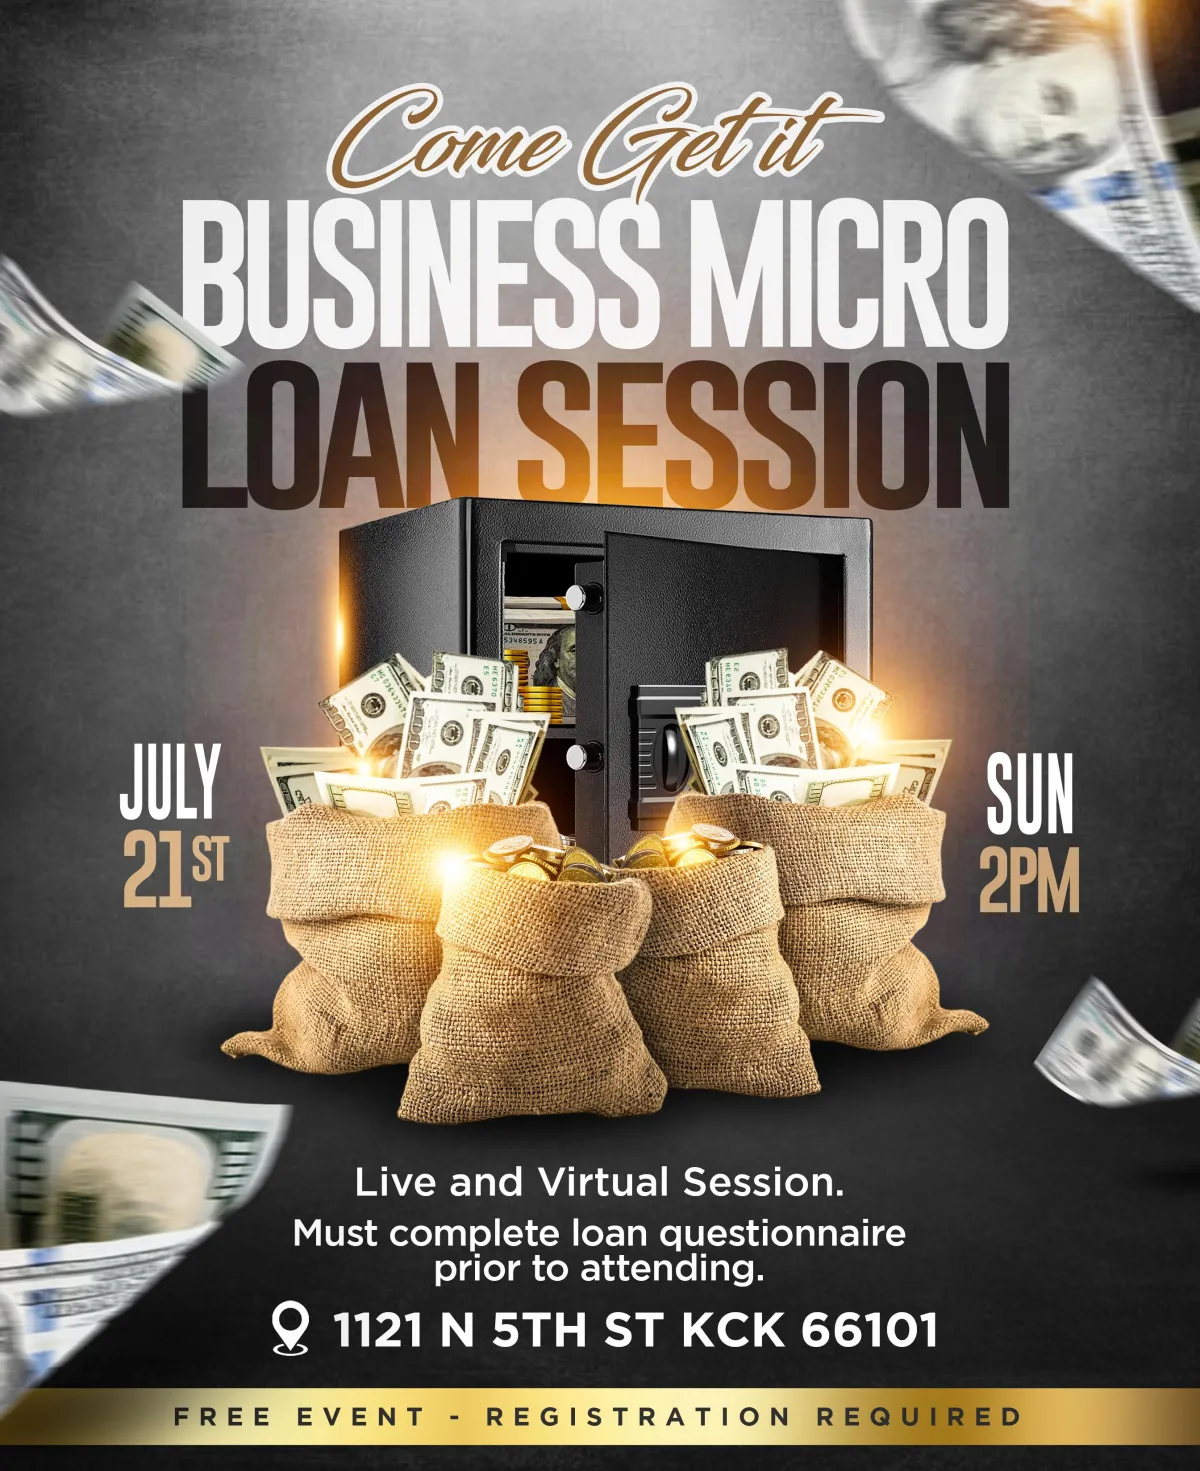 The Black Mastermind Group presents - Event Details: - Title: Business MicroLoan Session - Date: July 21, 2024 - Time: 2:00 pm - 4:00 pm Central Time - Location: Kansas City, Kansas.  "Come Get It!"